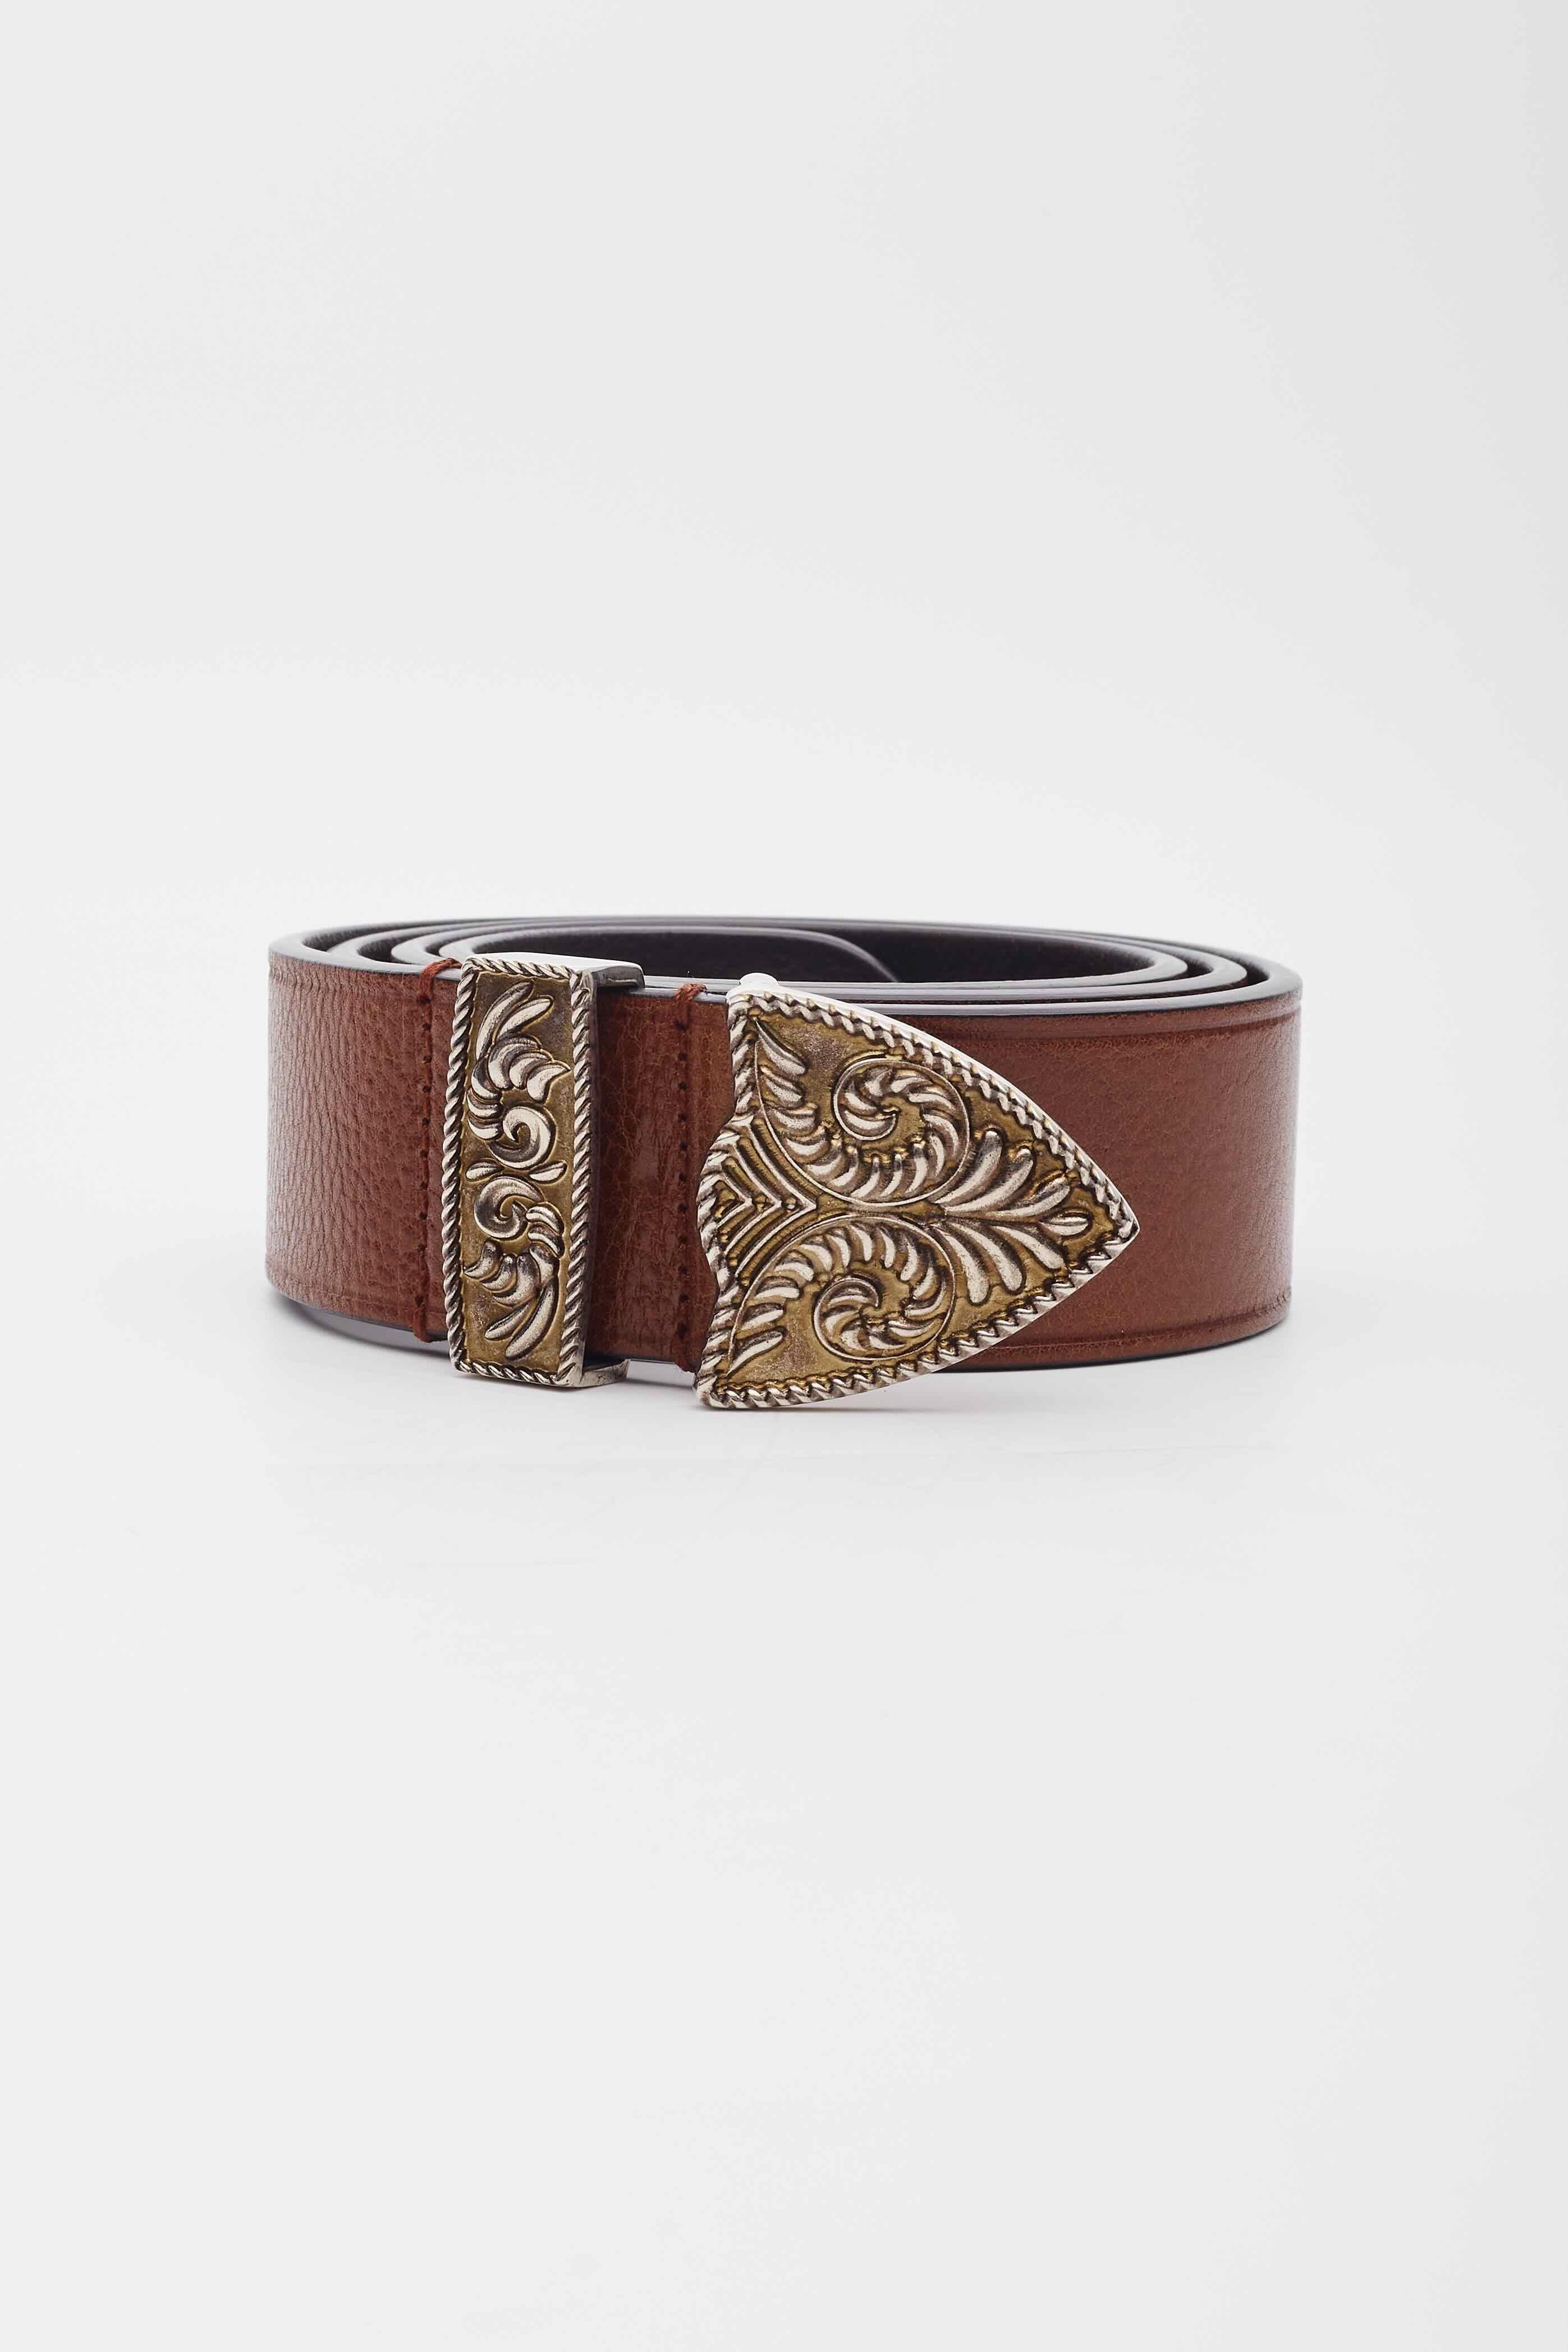 Givenchy Brown Leather Belt With Bronze Western Buckle For Sale 1